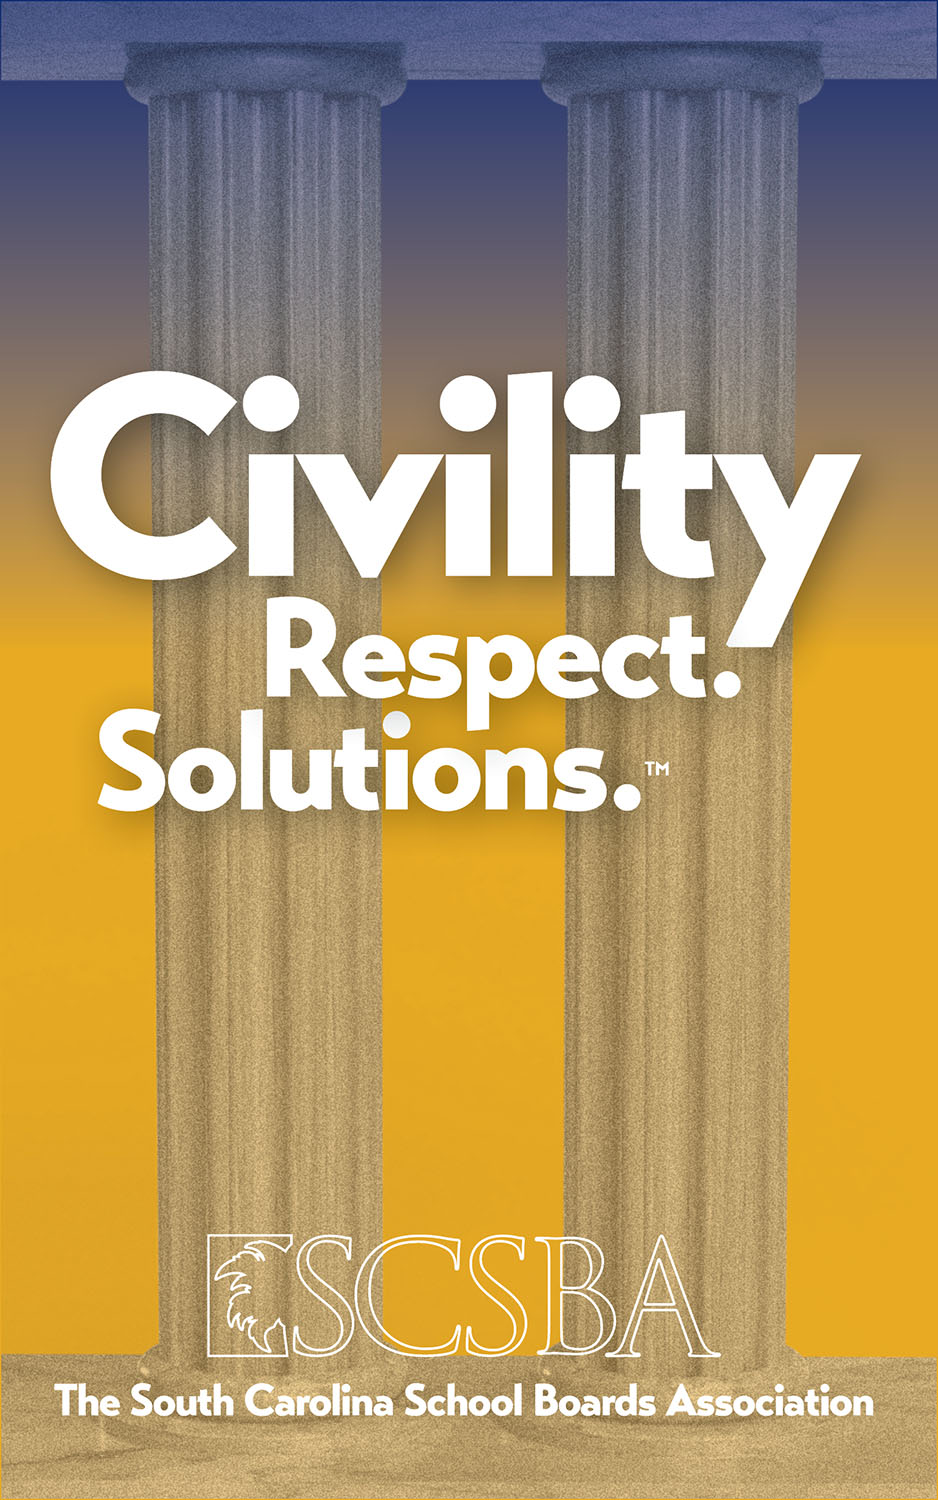 Civility. Respect. Solutions.